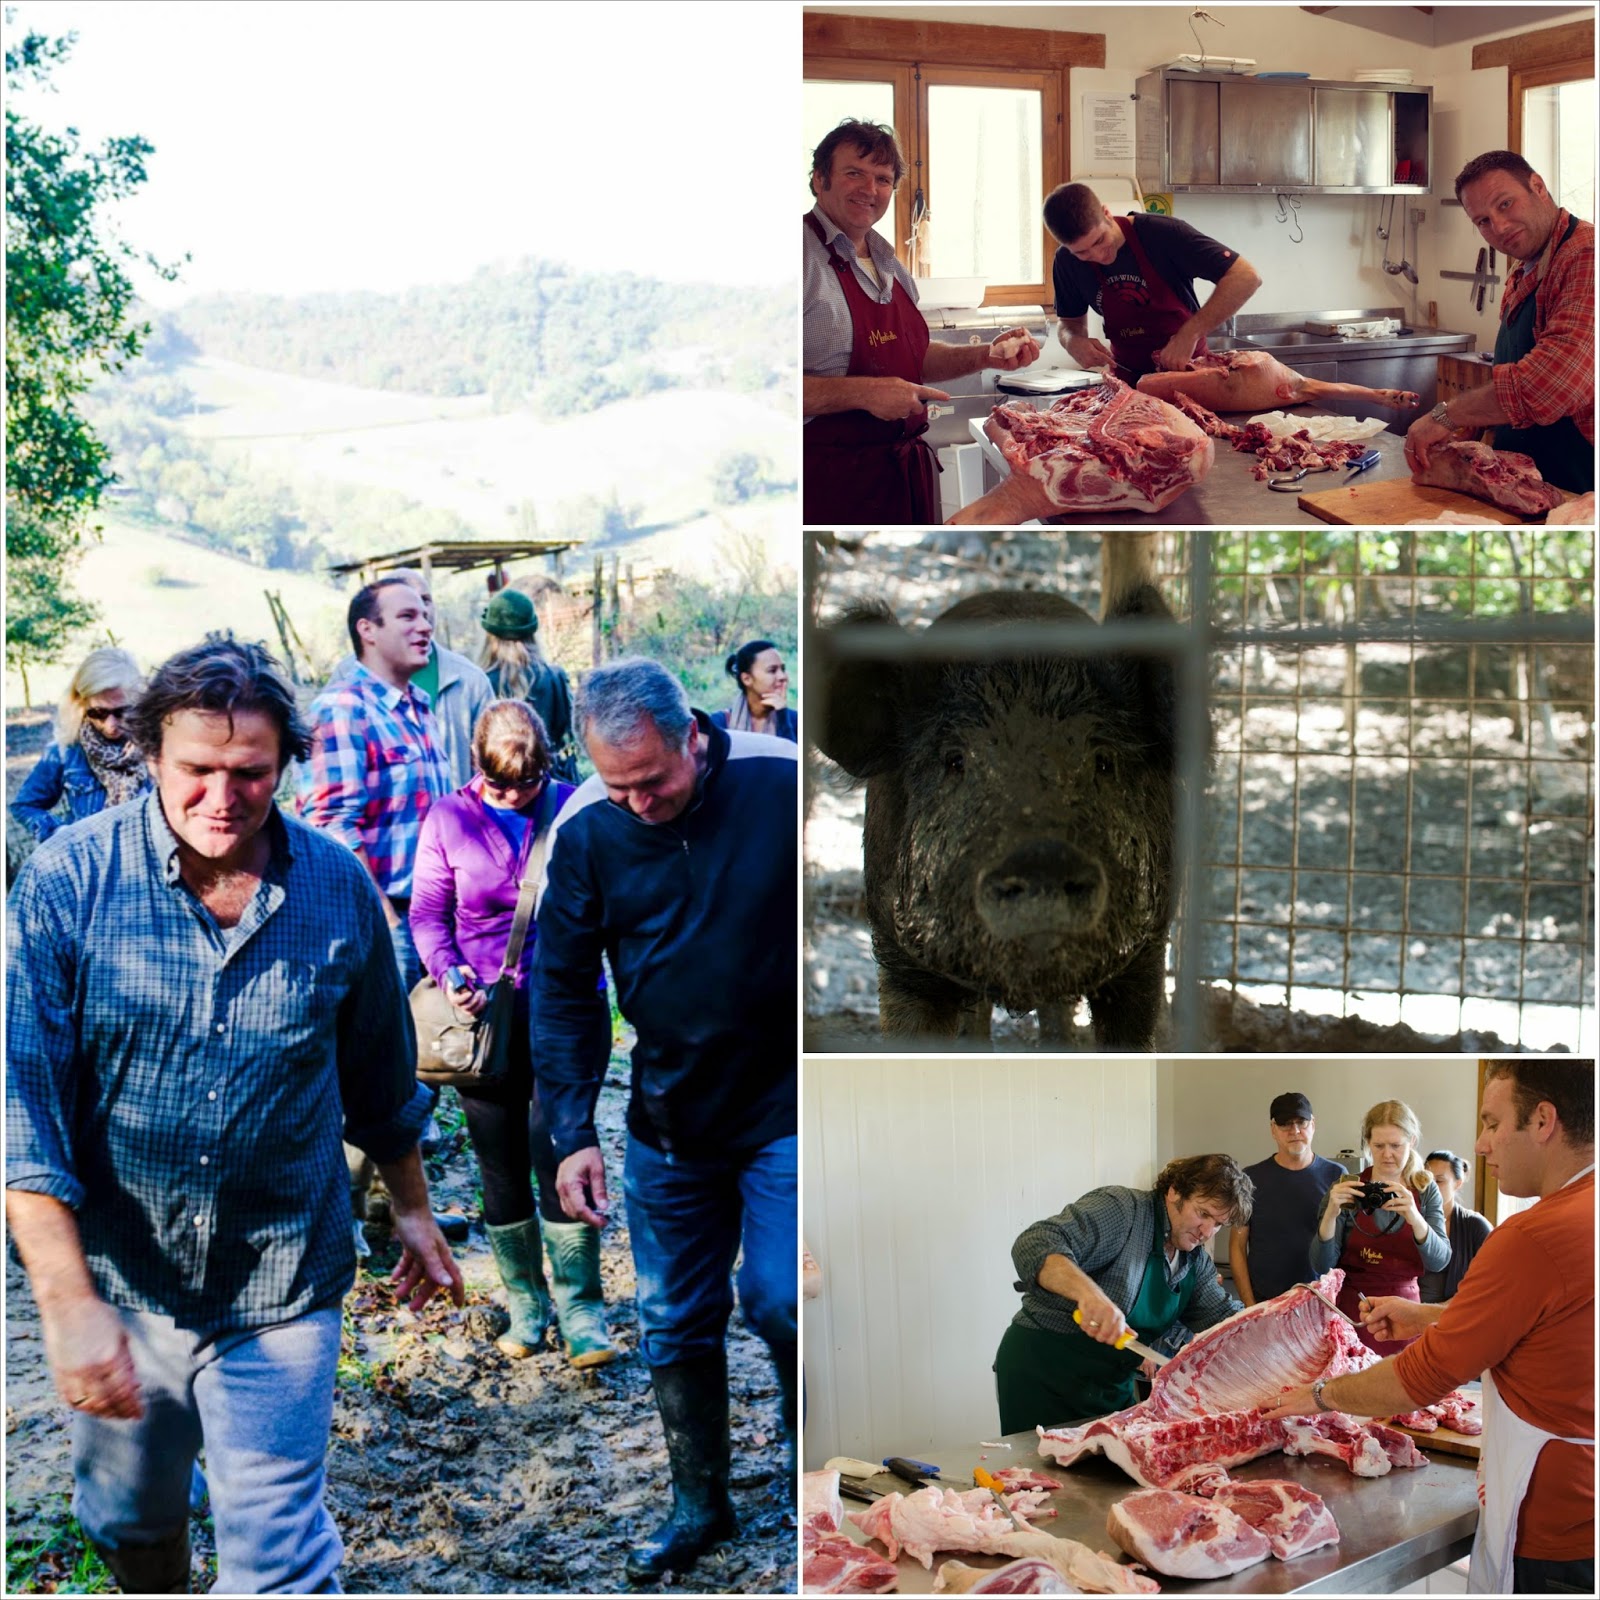 Old World Butchery Course with Artisans & Farmers in Italy, La Tavola Marche